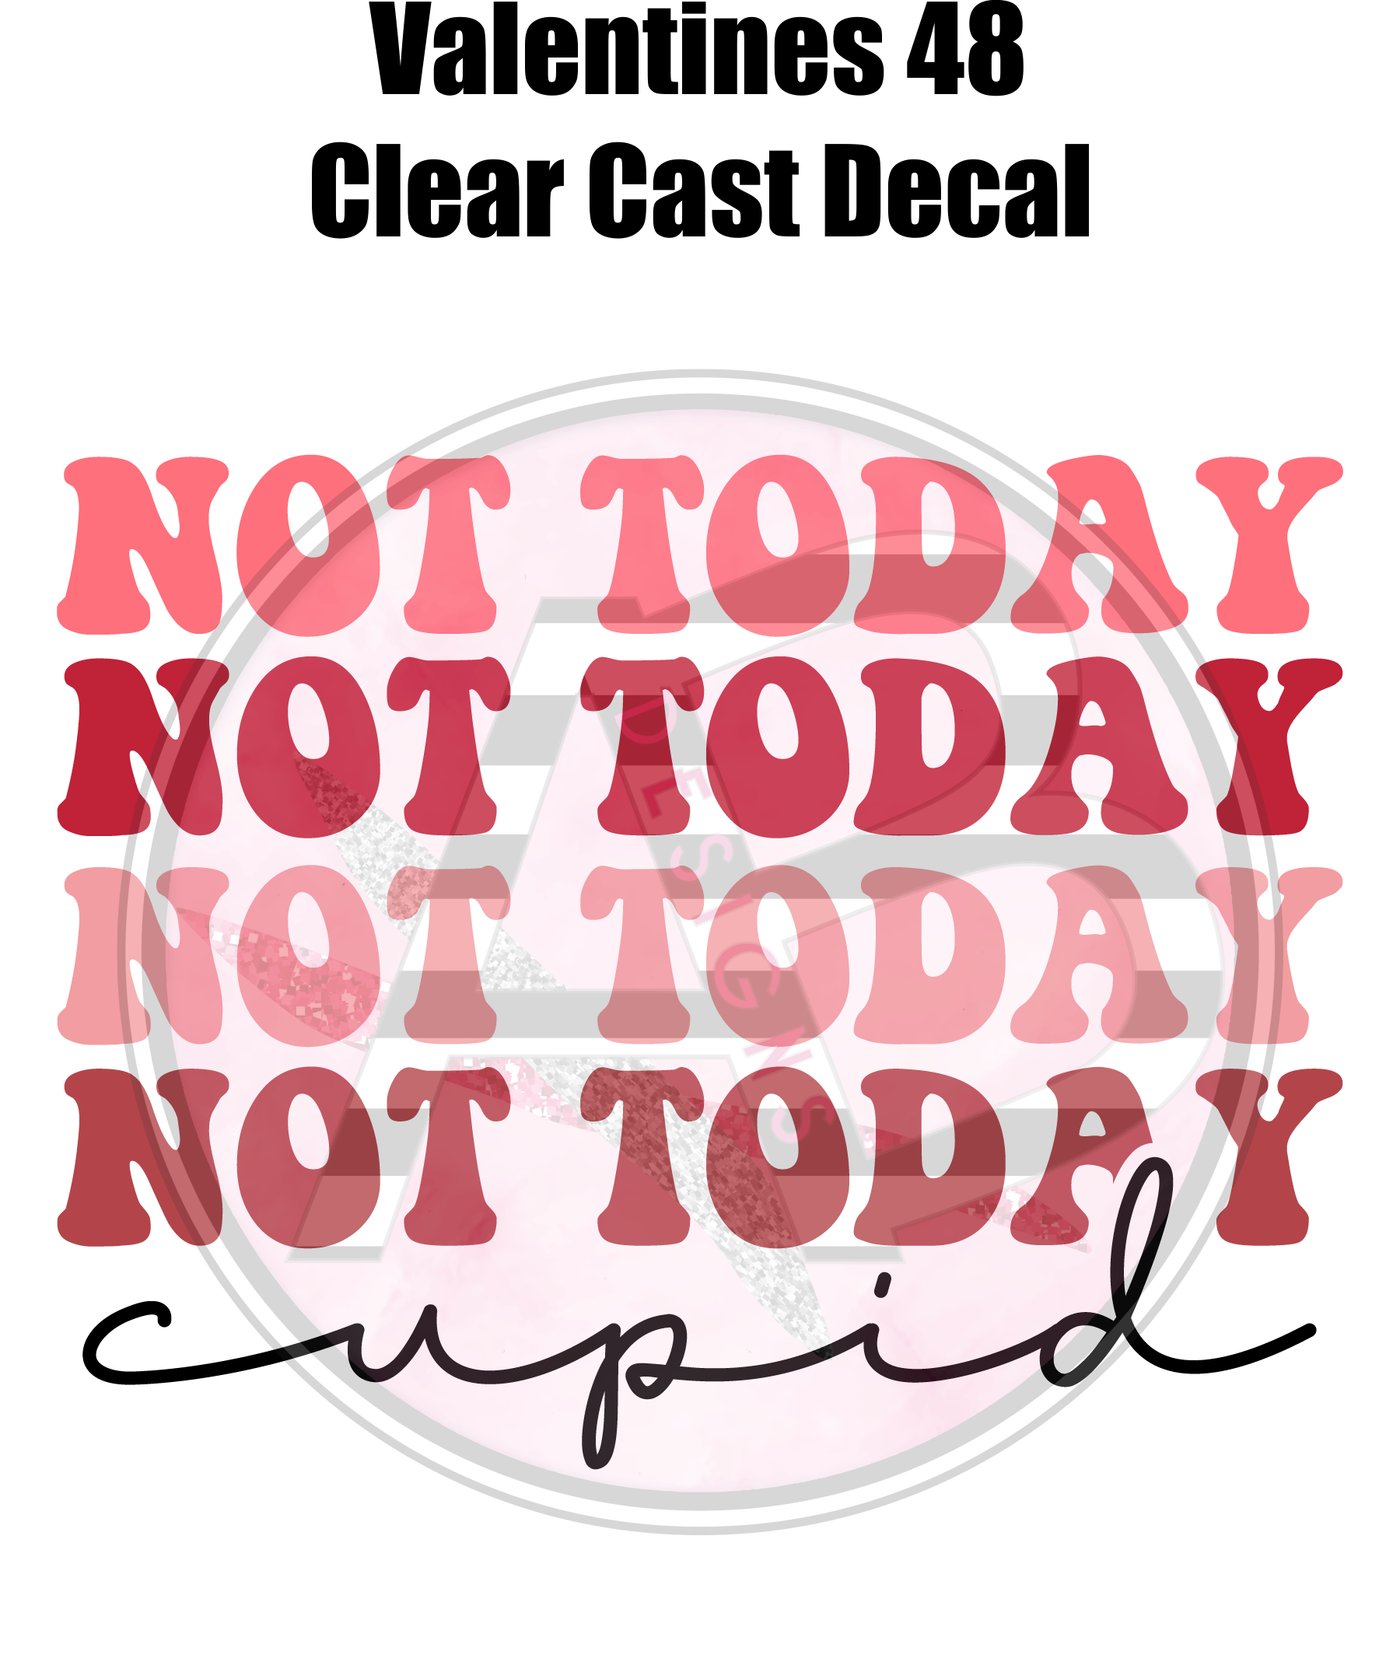 Valentines 48 - Clear Cast Decal